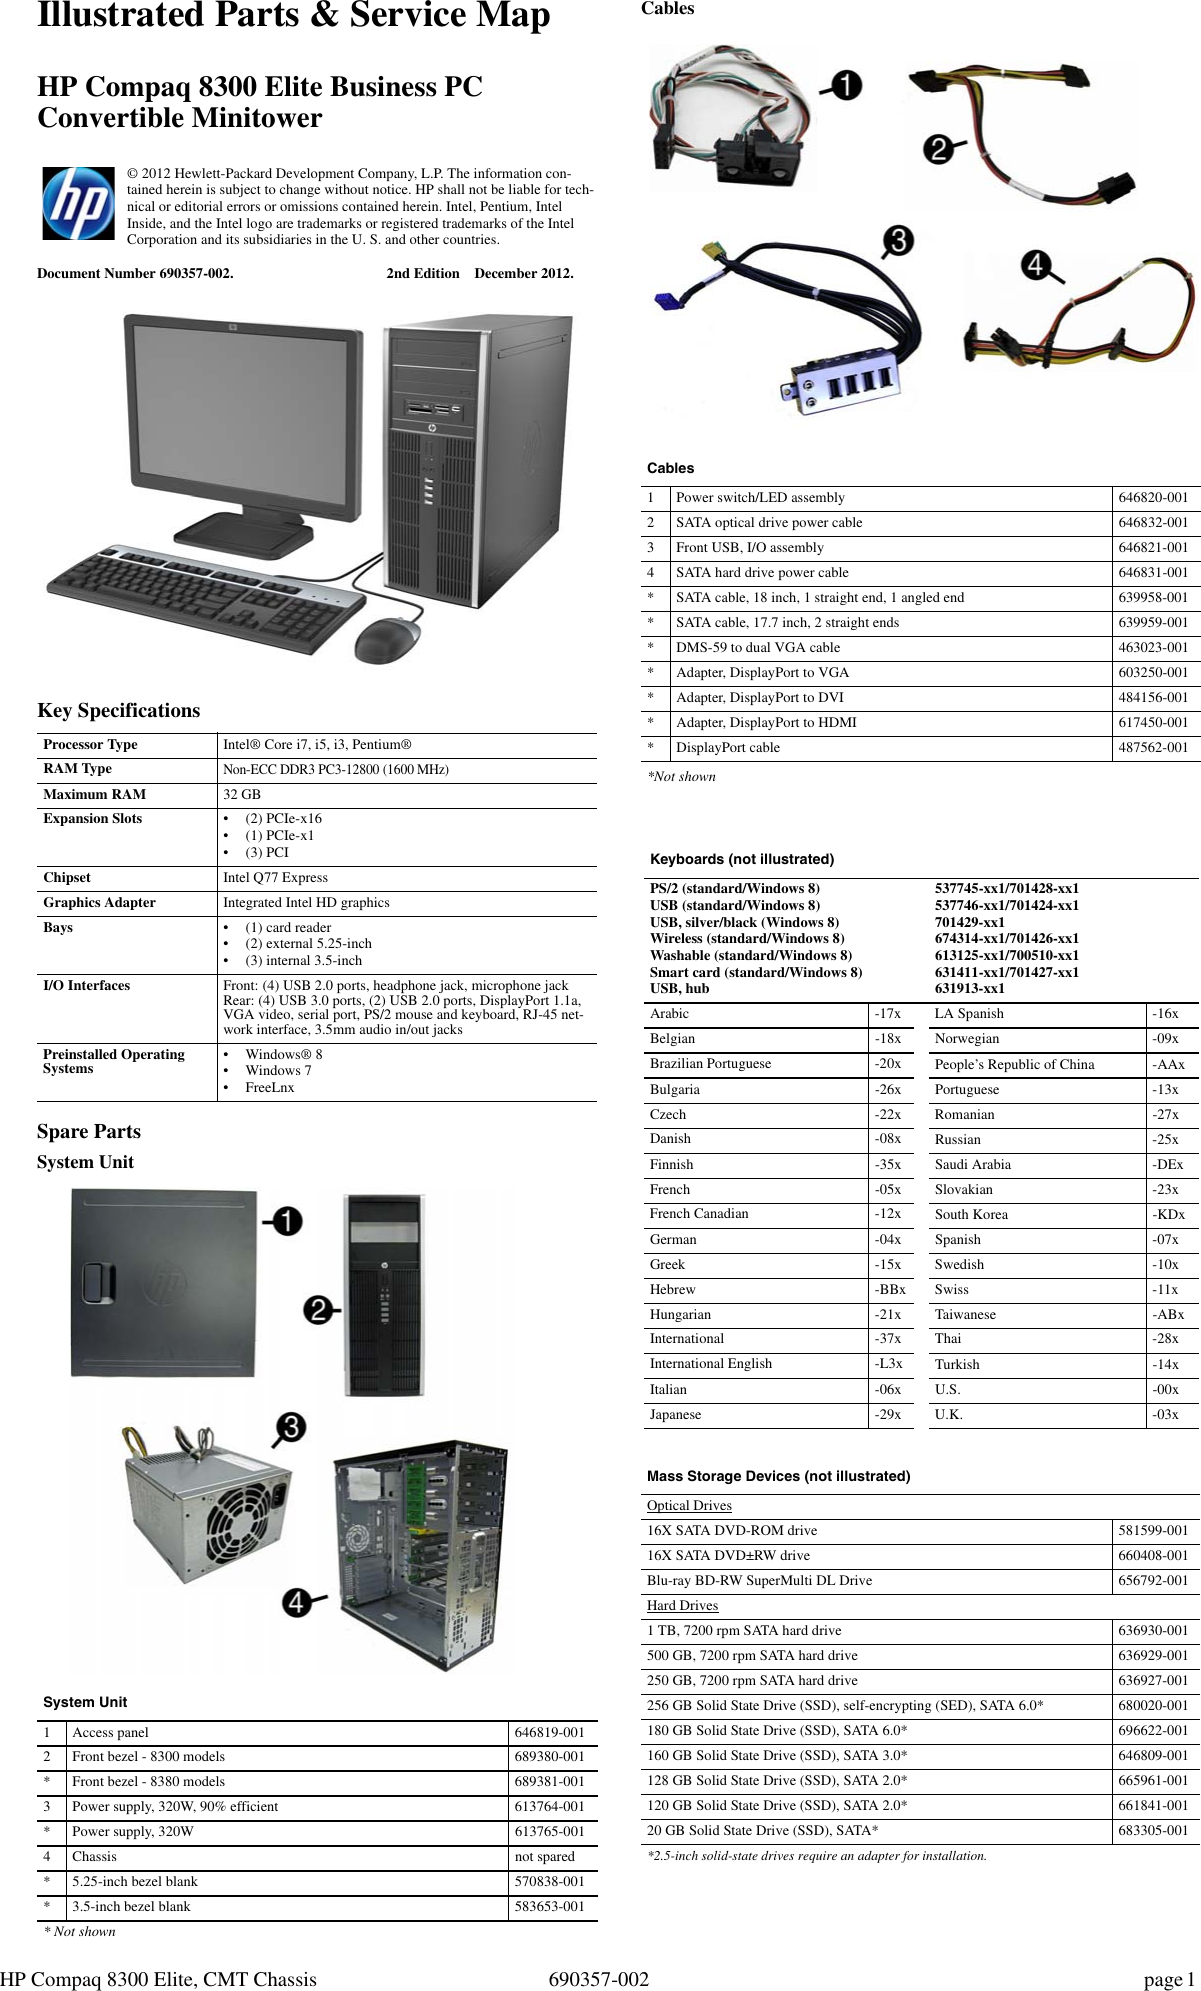 Hp Compaq Elite 8300 Convertible Minitower Pc Reference Guide 